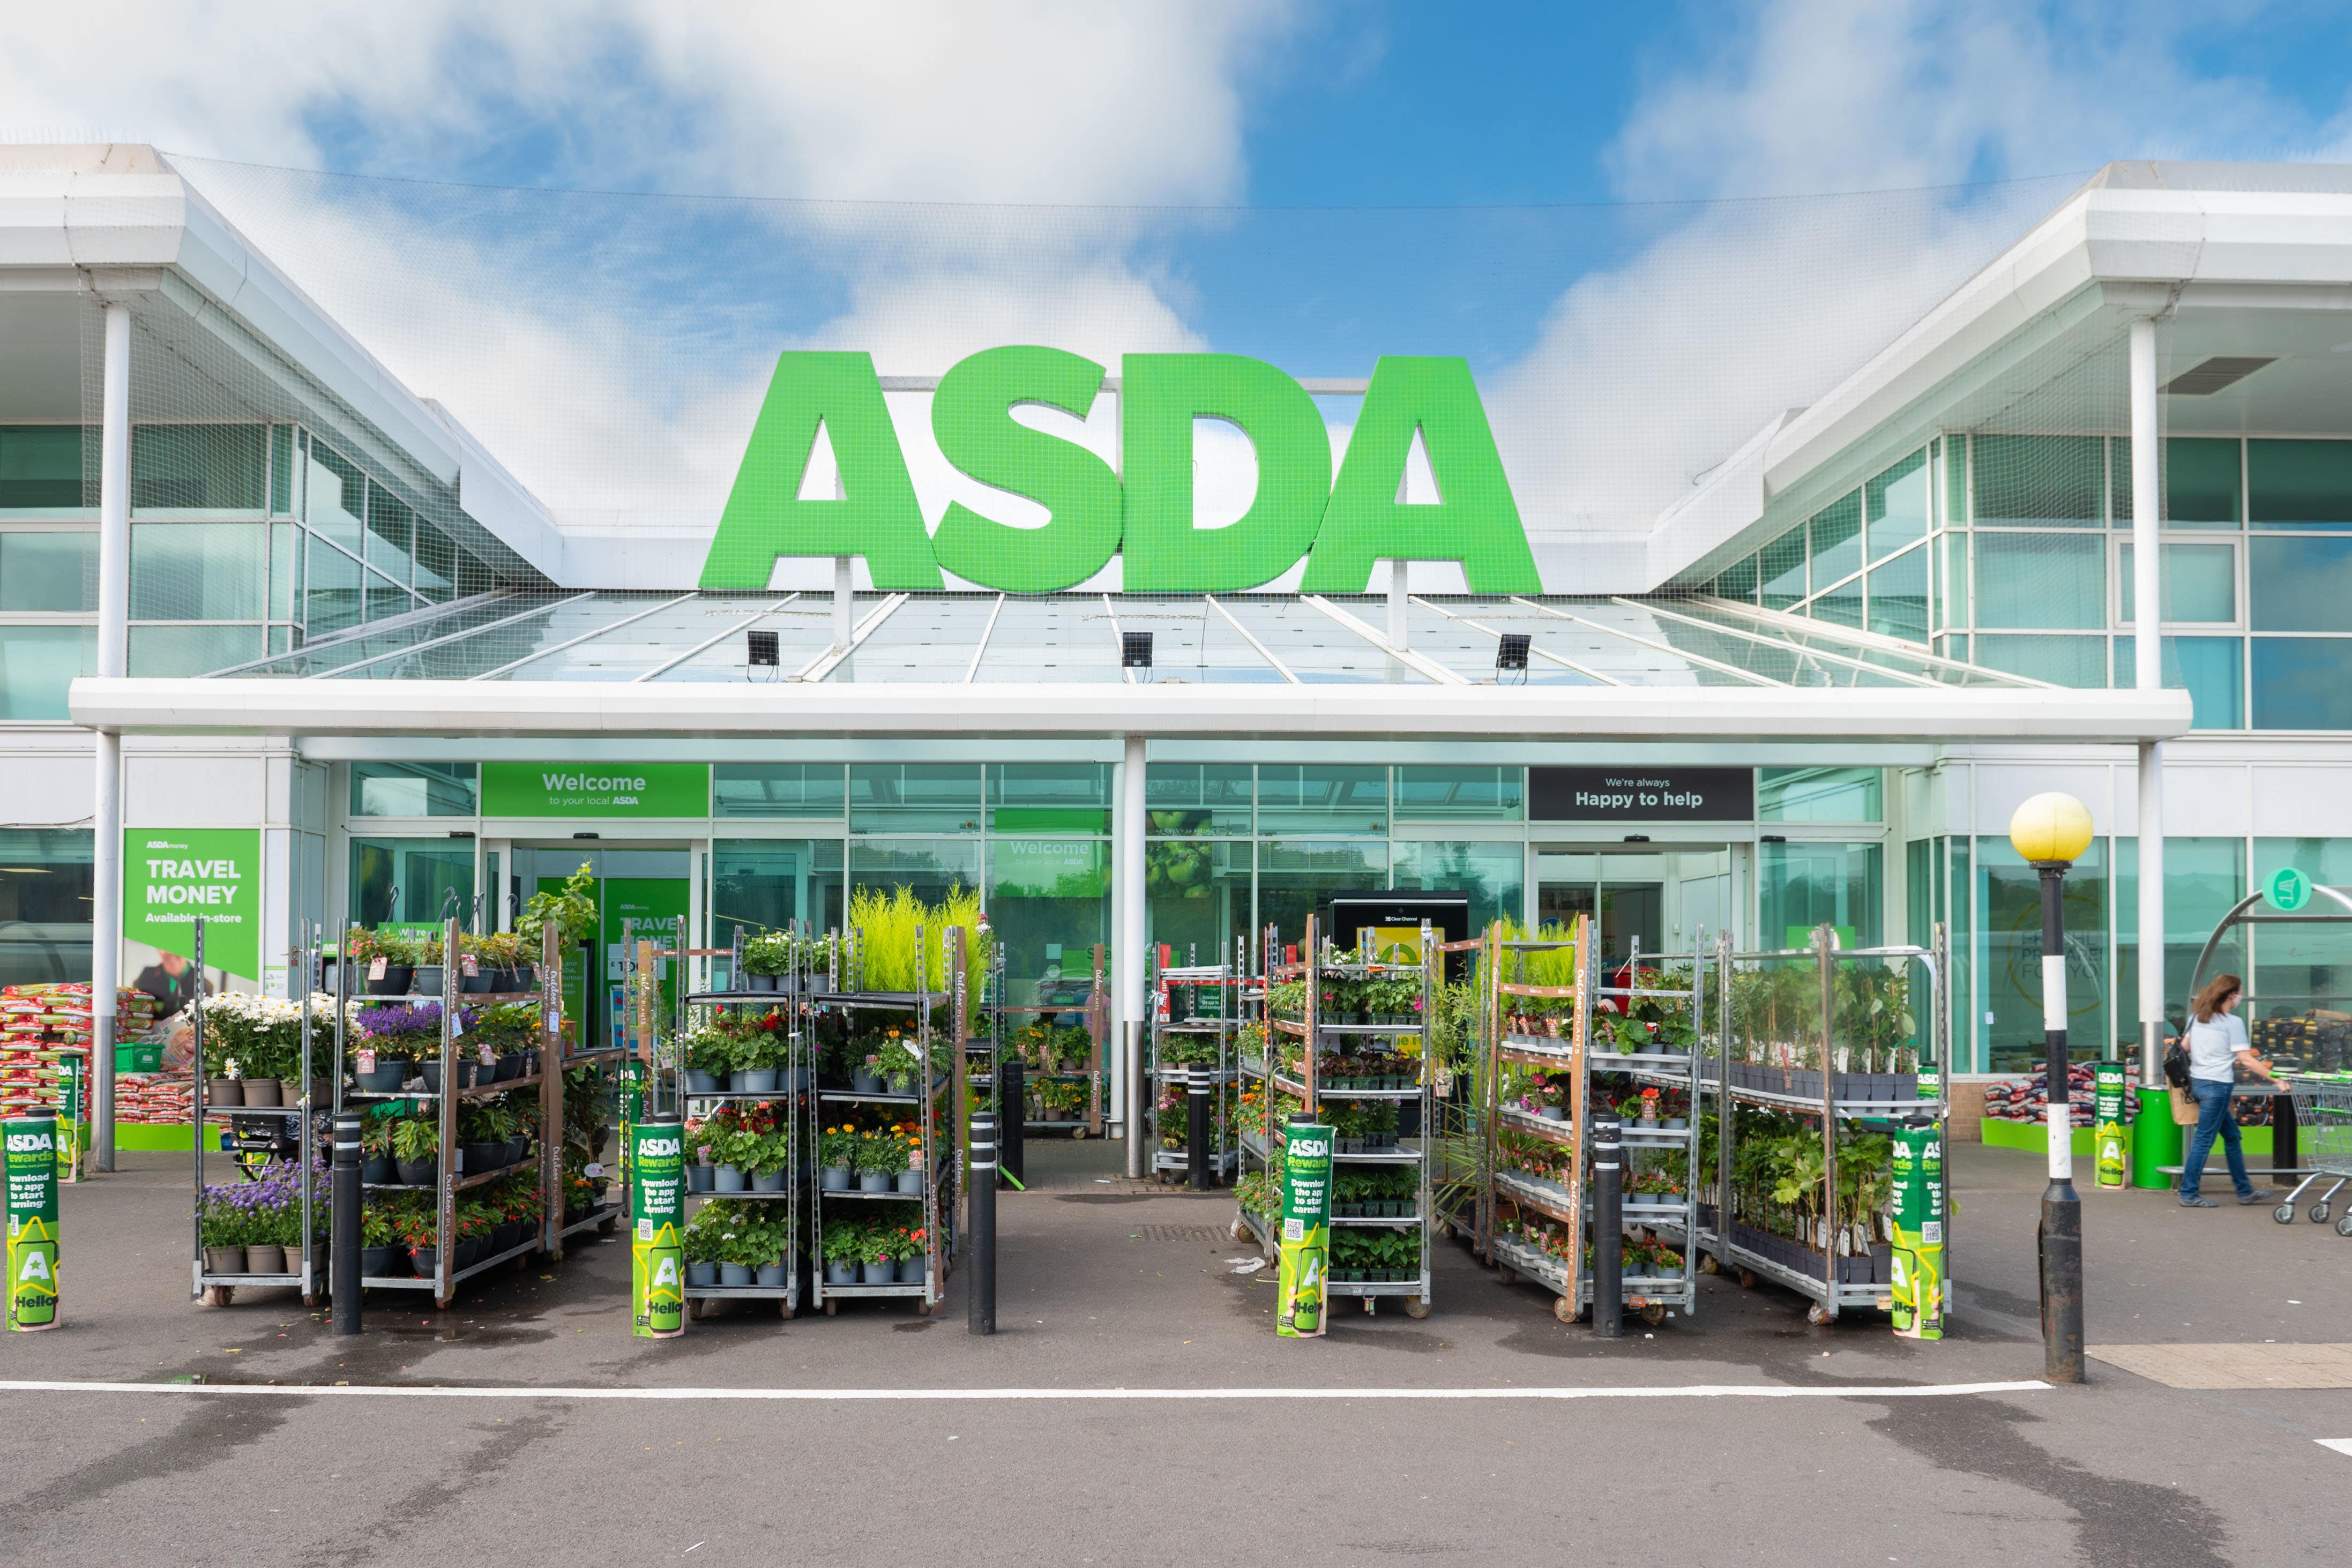 Supermarkets including Tesco and Asda 'may have been selling